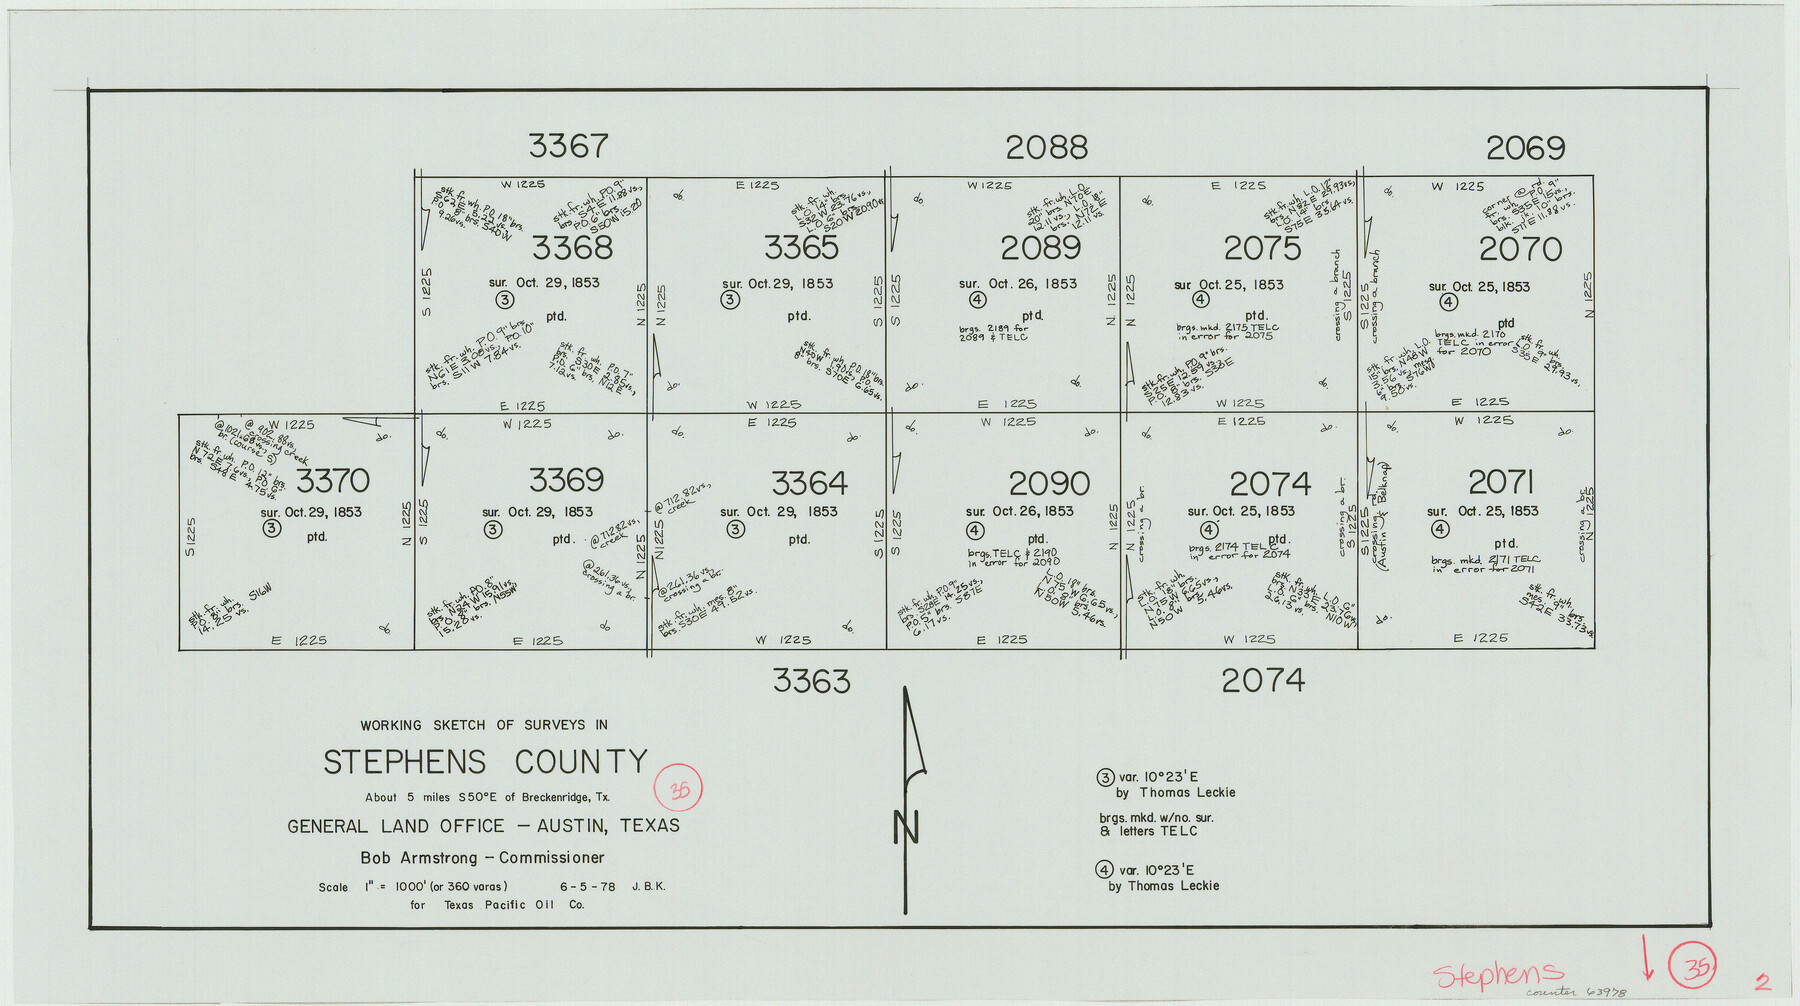 63978, Stephens County Working Sketch 35, General Map Collection